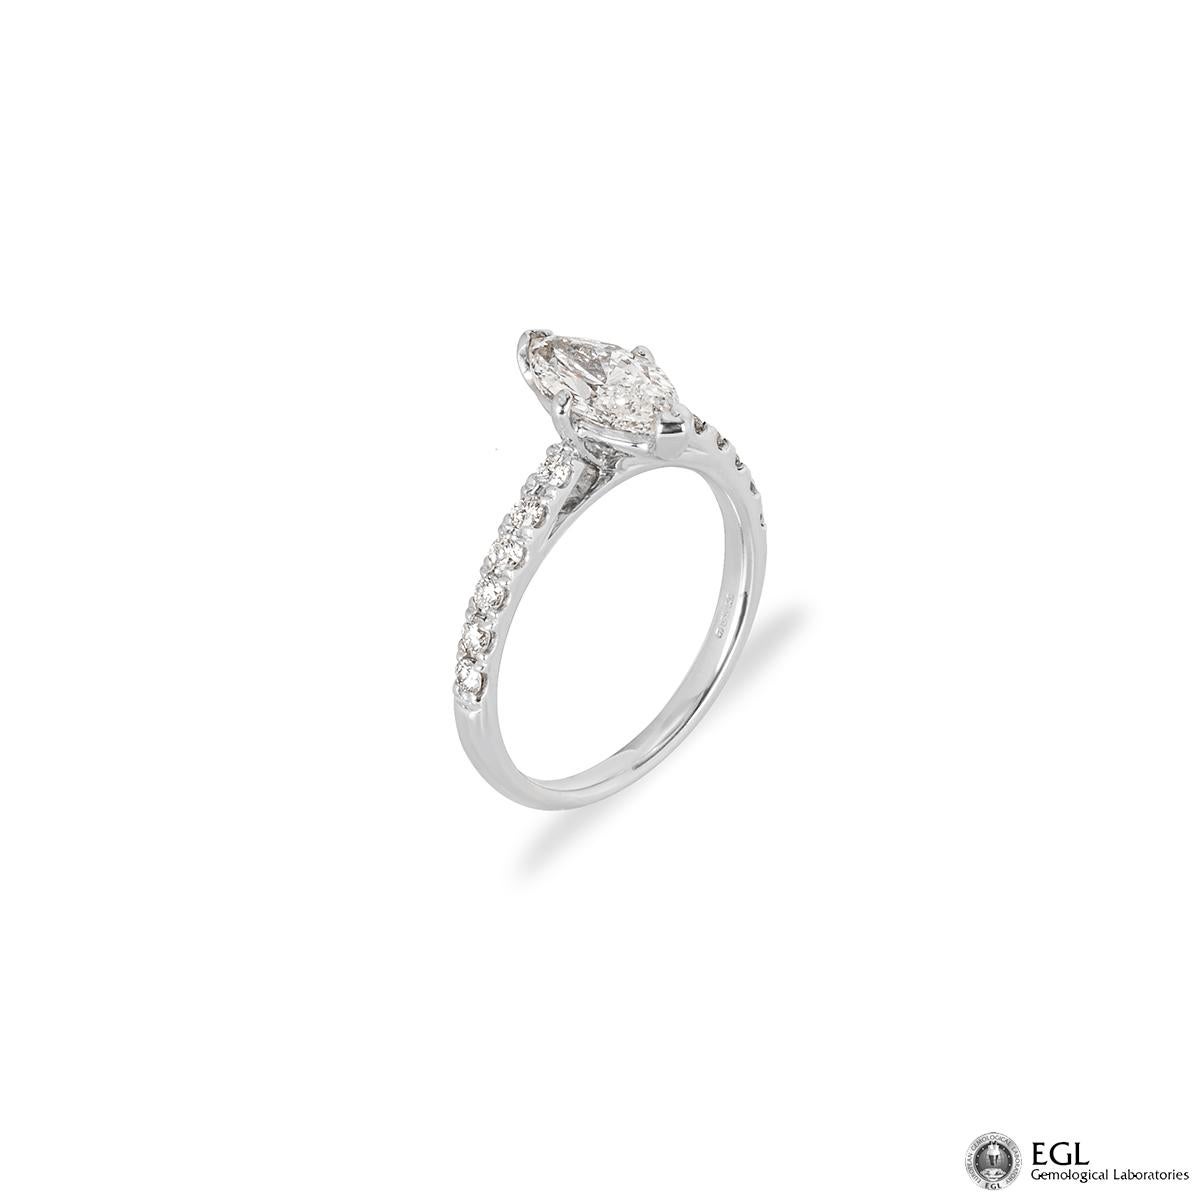 A beautiful 18k white gold diamond engagement ring. The ring is set to the centre with a 1.01ct marquise cut diamond, G colour and SI2 in clarity. Set to either side of the diamond are 6 round brilliant cut pave set diamonds totalling 0.23ct. The